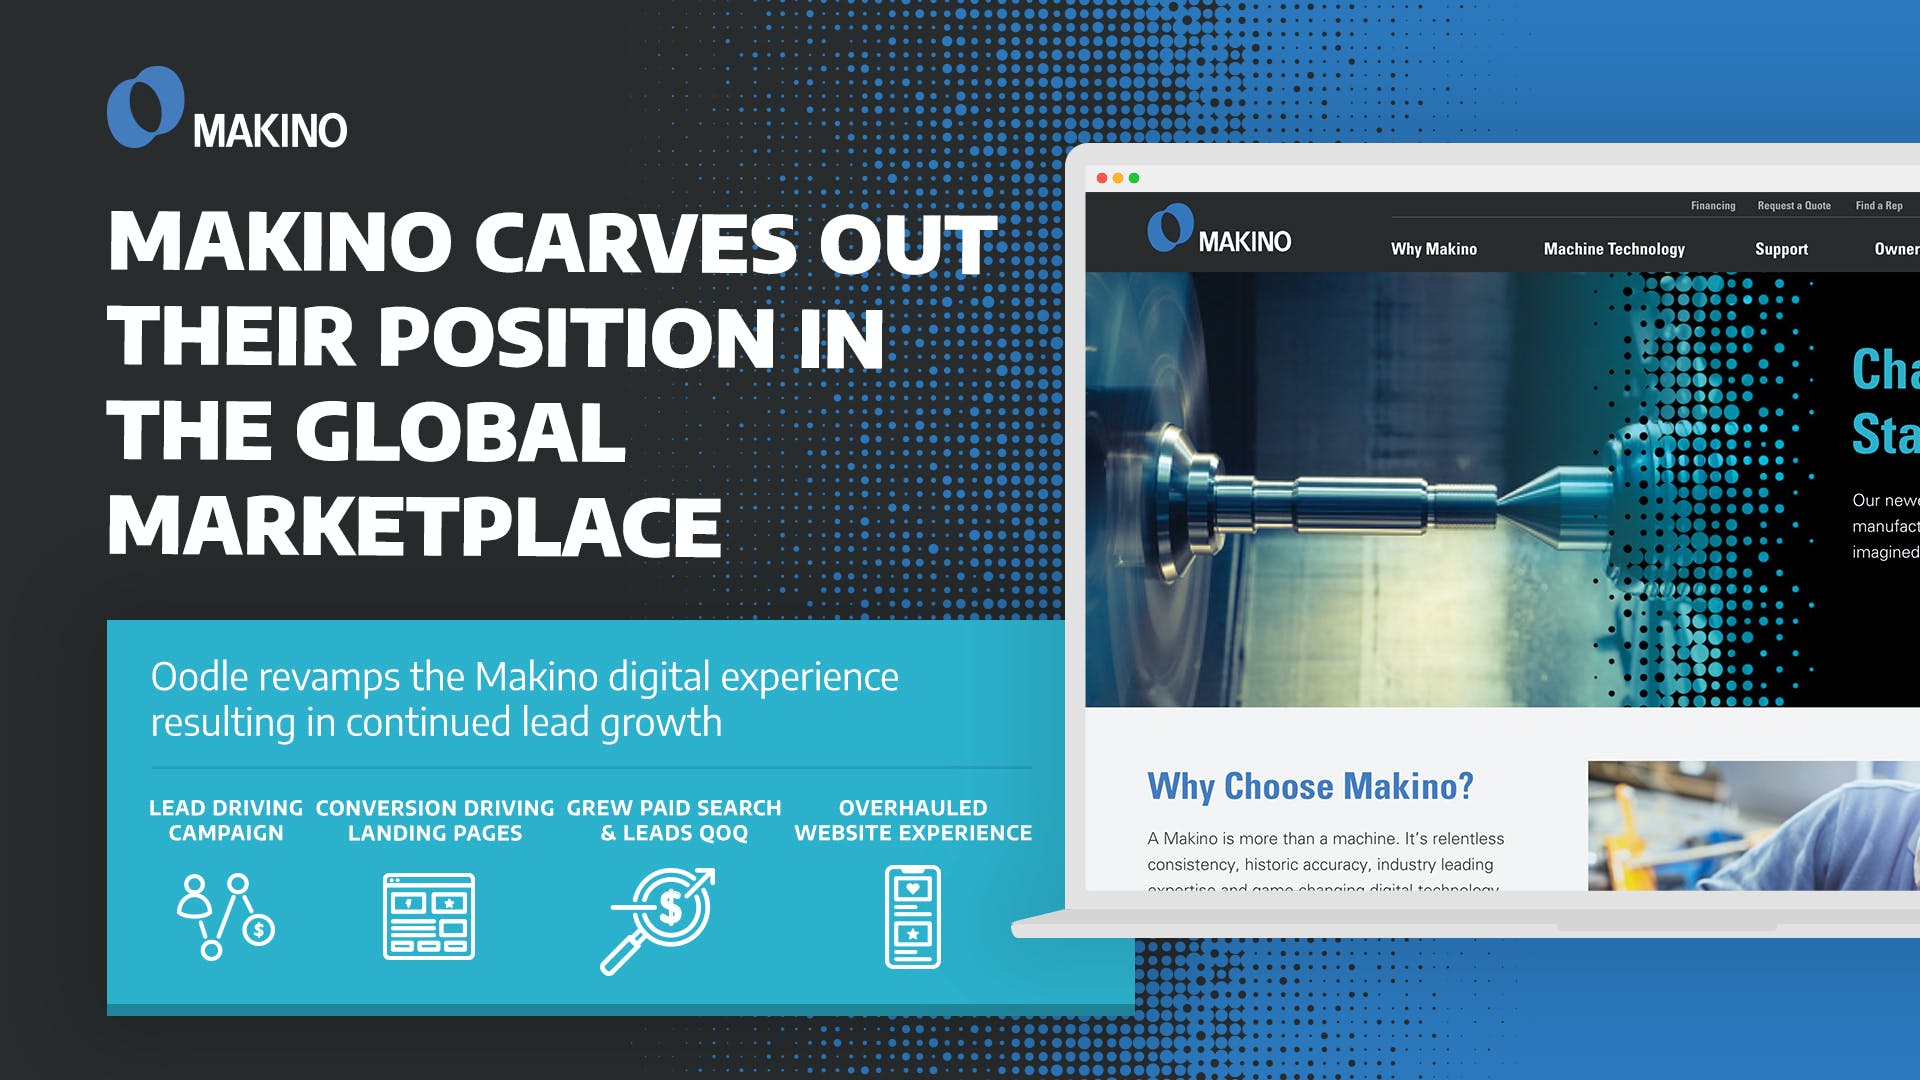 Makino carves out their position in the global marketplace